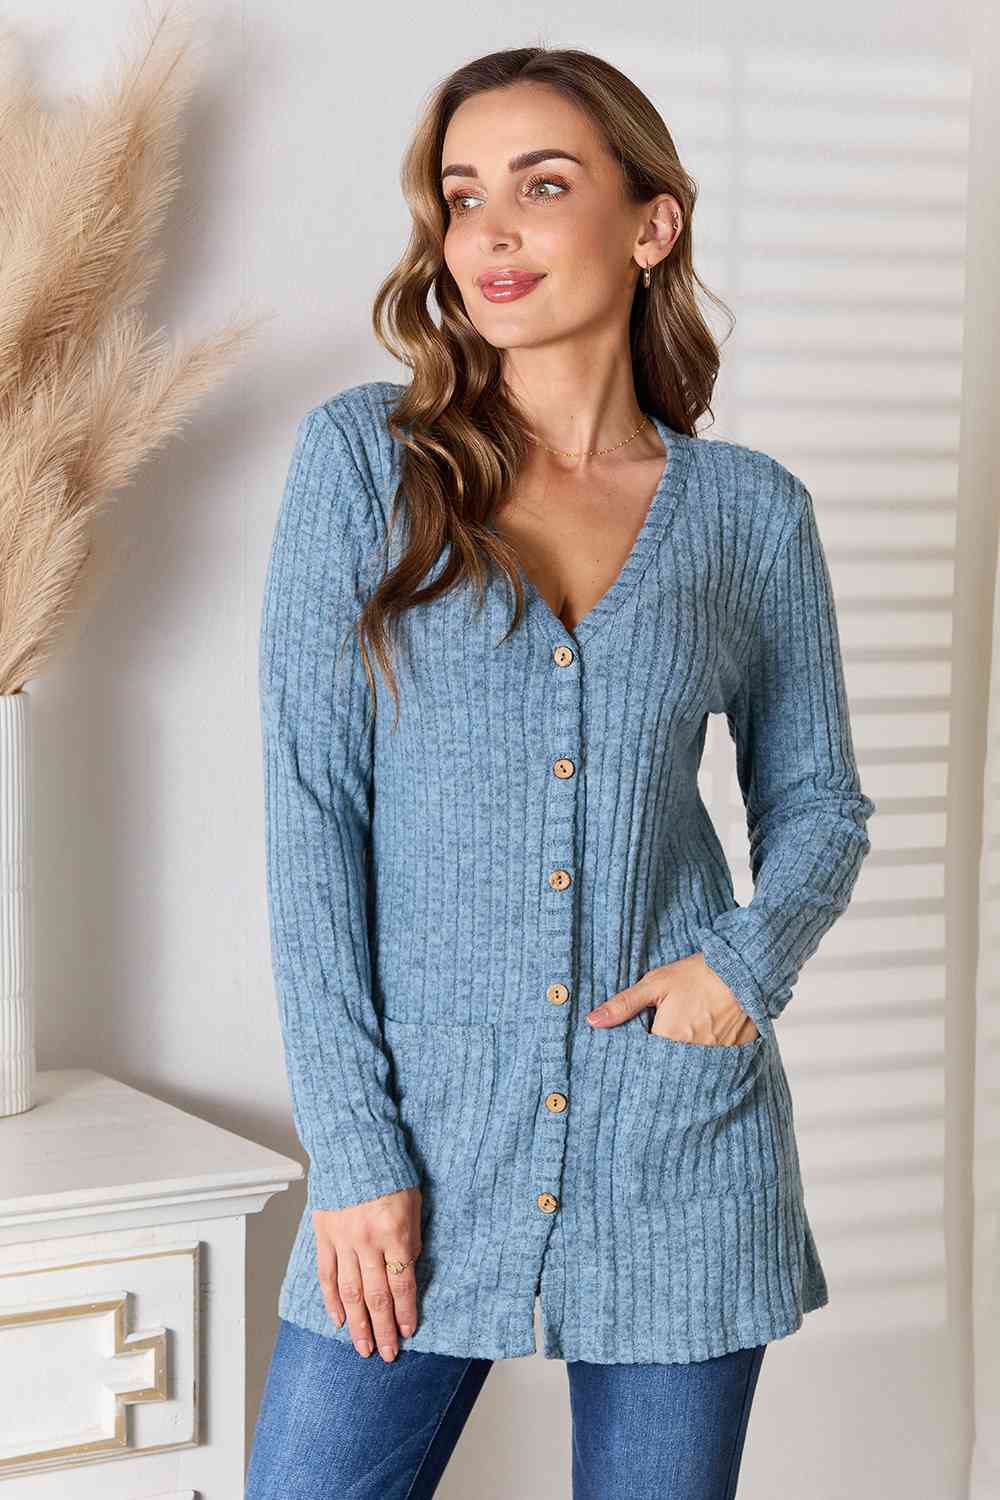 Ribbed Button-Up Cardigan with Pockets - Pastel Blue / S - Women’s Clothing & Accessories - Shirts & Tops - 10 - 2024